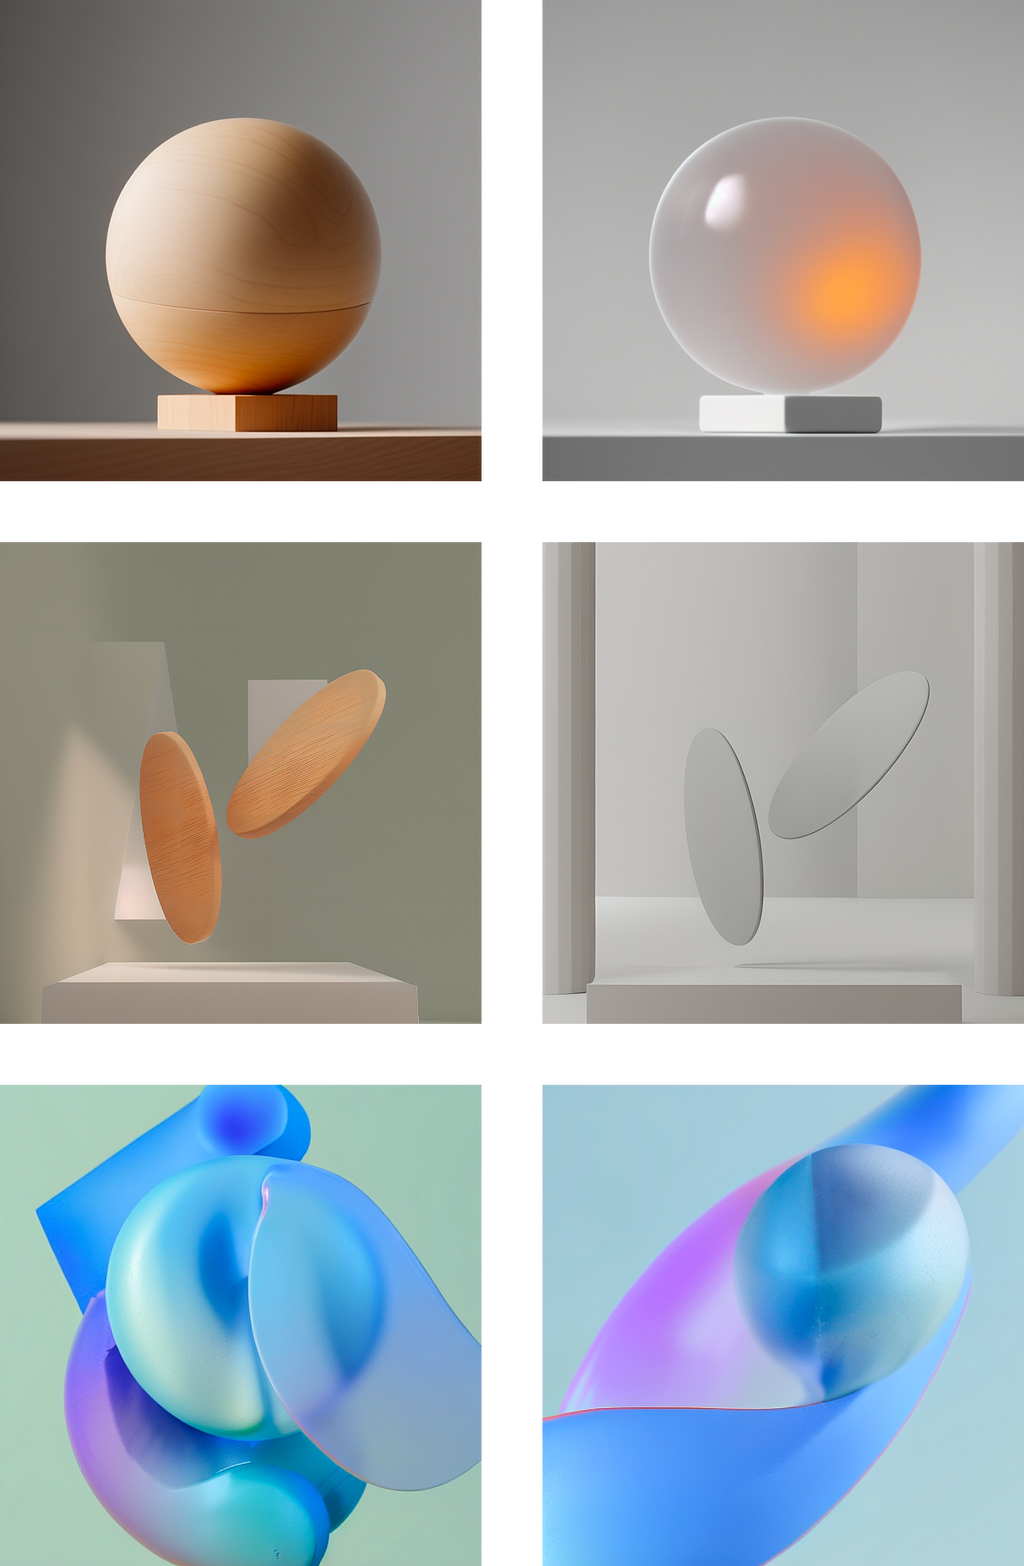 Quick explorations from very simple shapes to more abstract and amorphous ones.